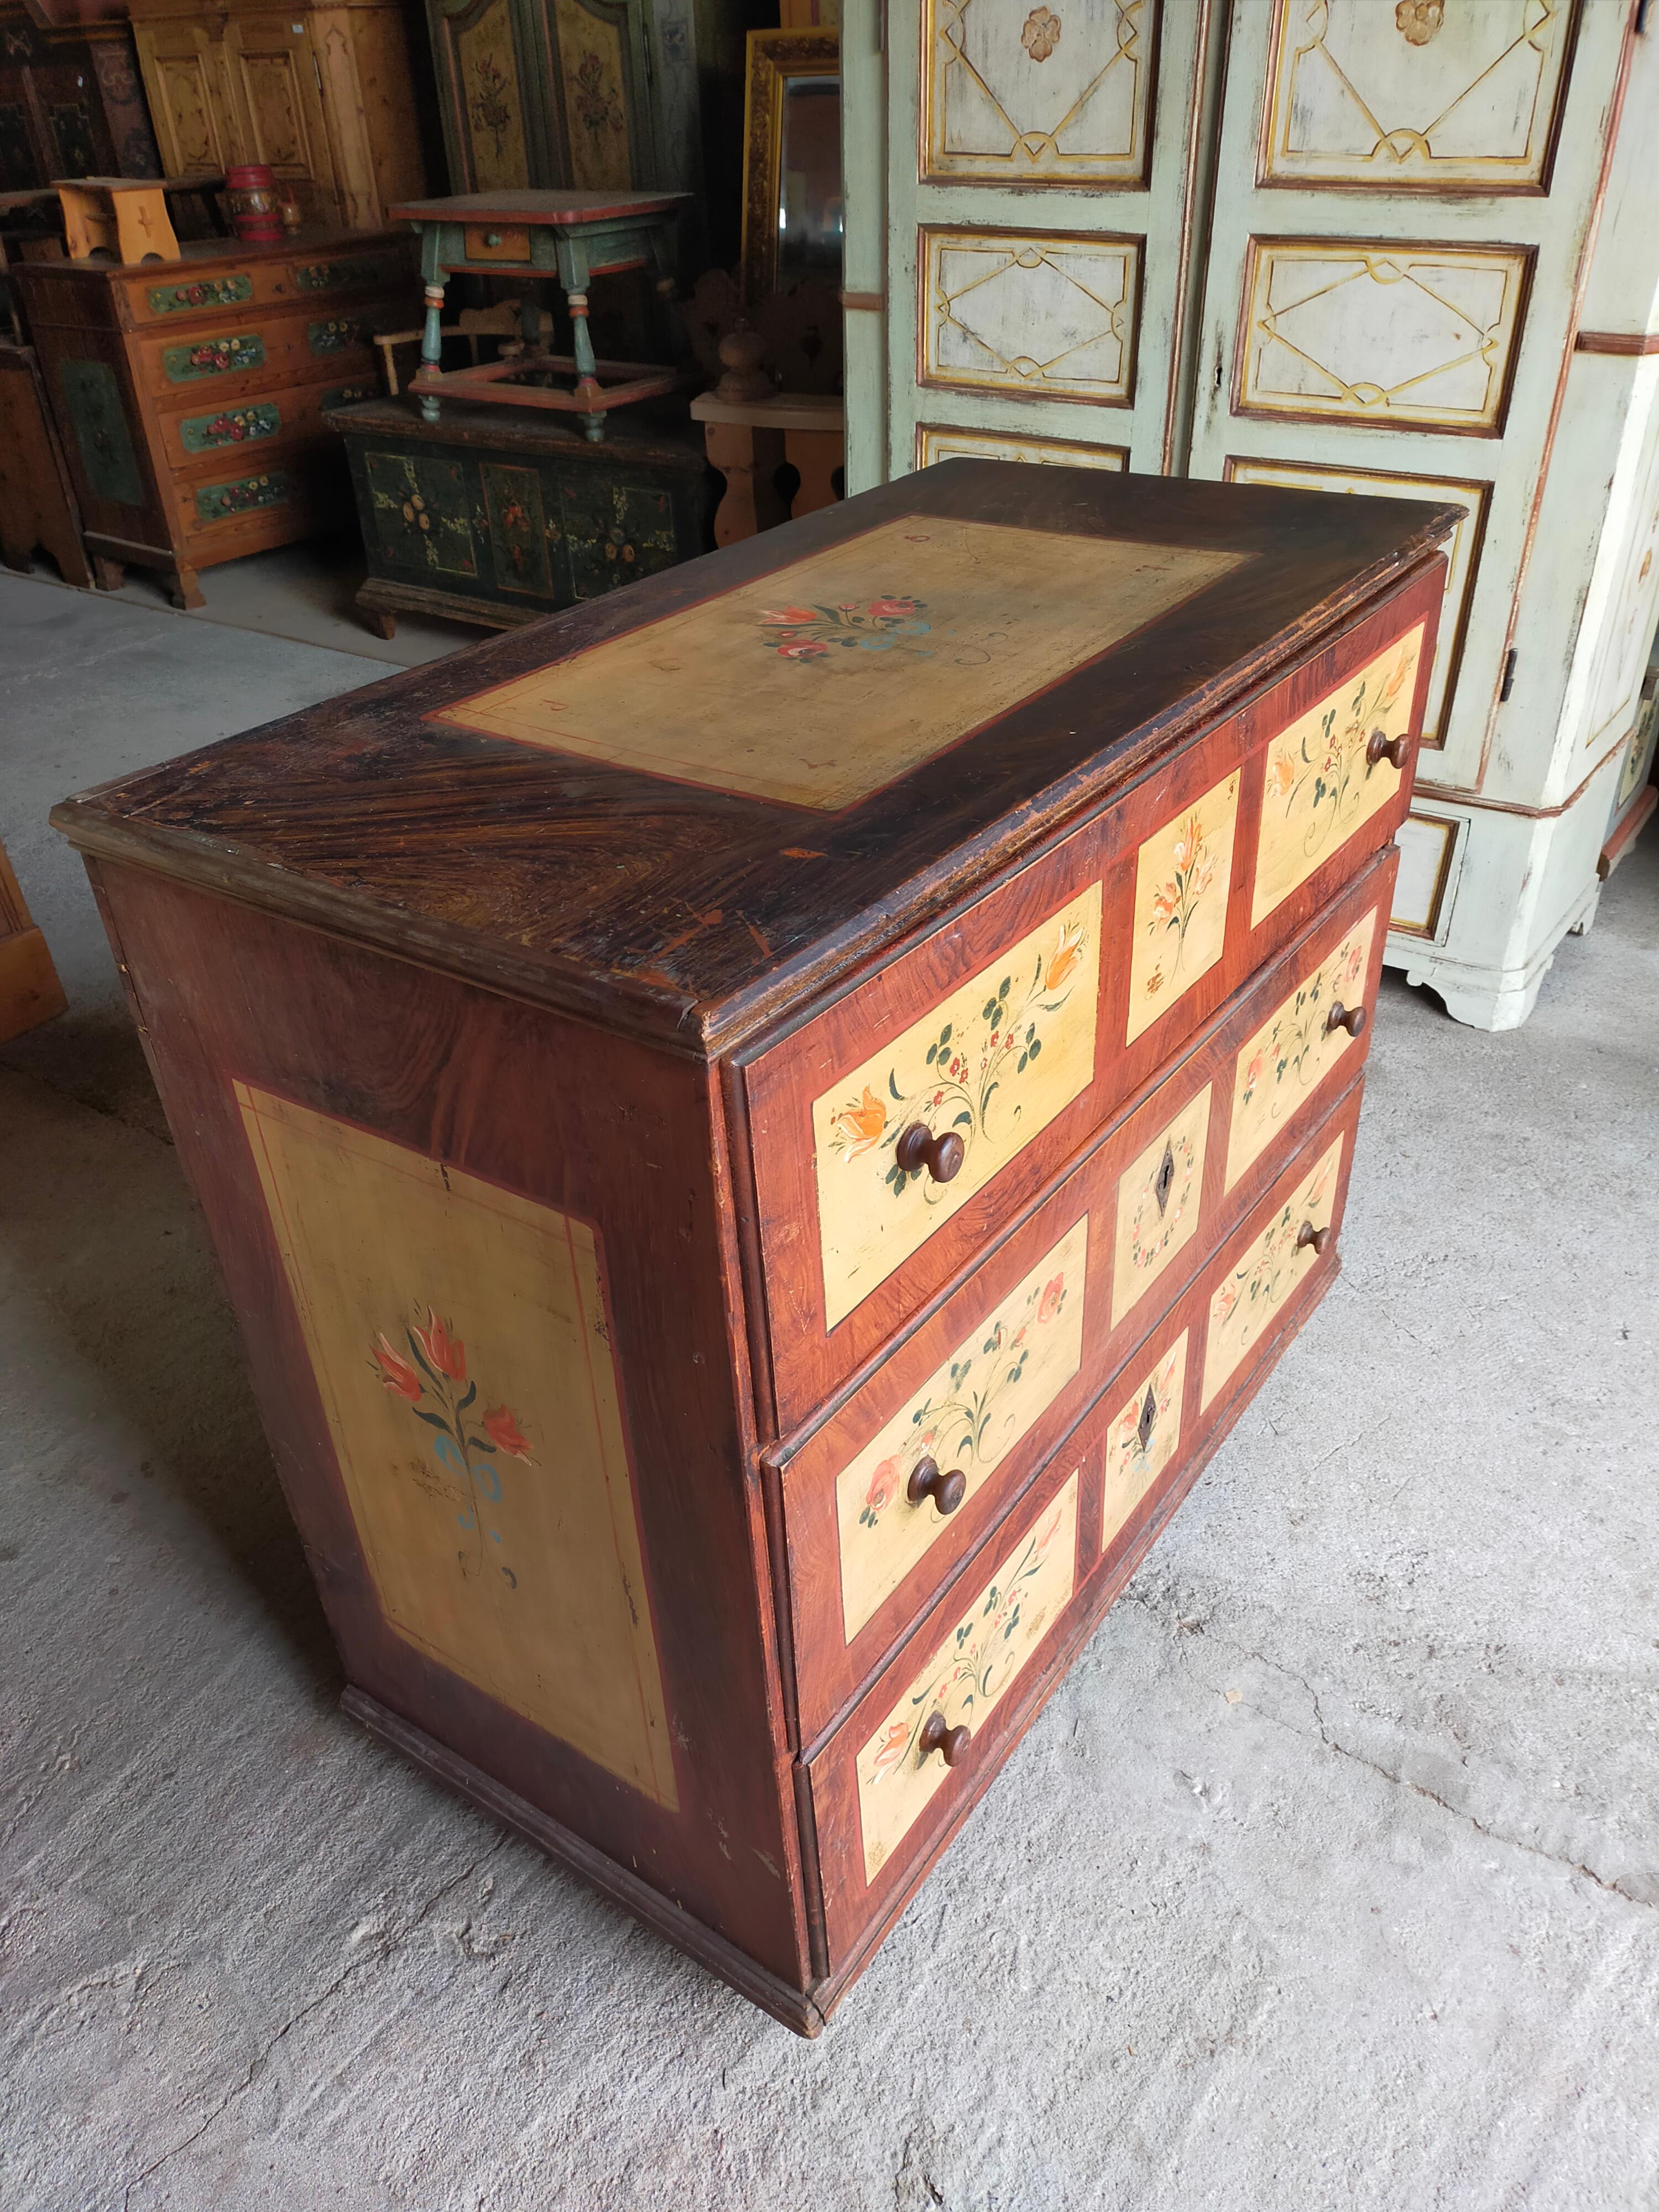 Chest of drawers made entirely of stone pine with interior storage drawers in the first drawer.
Original double lock with key.
Period decoration.

More photos  and information at the customer's request.
